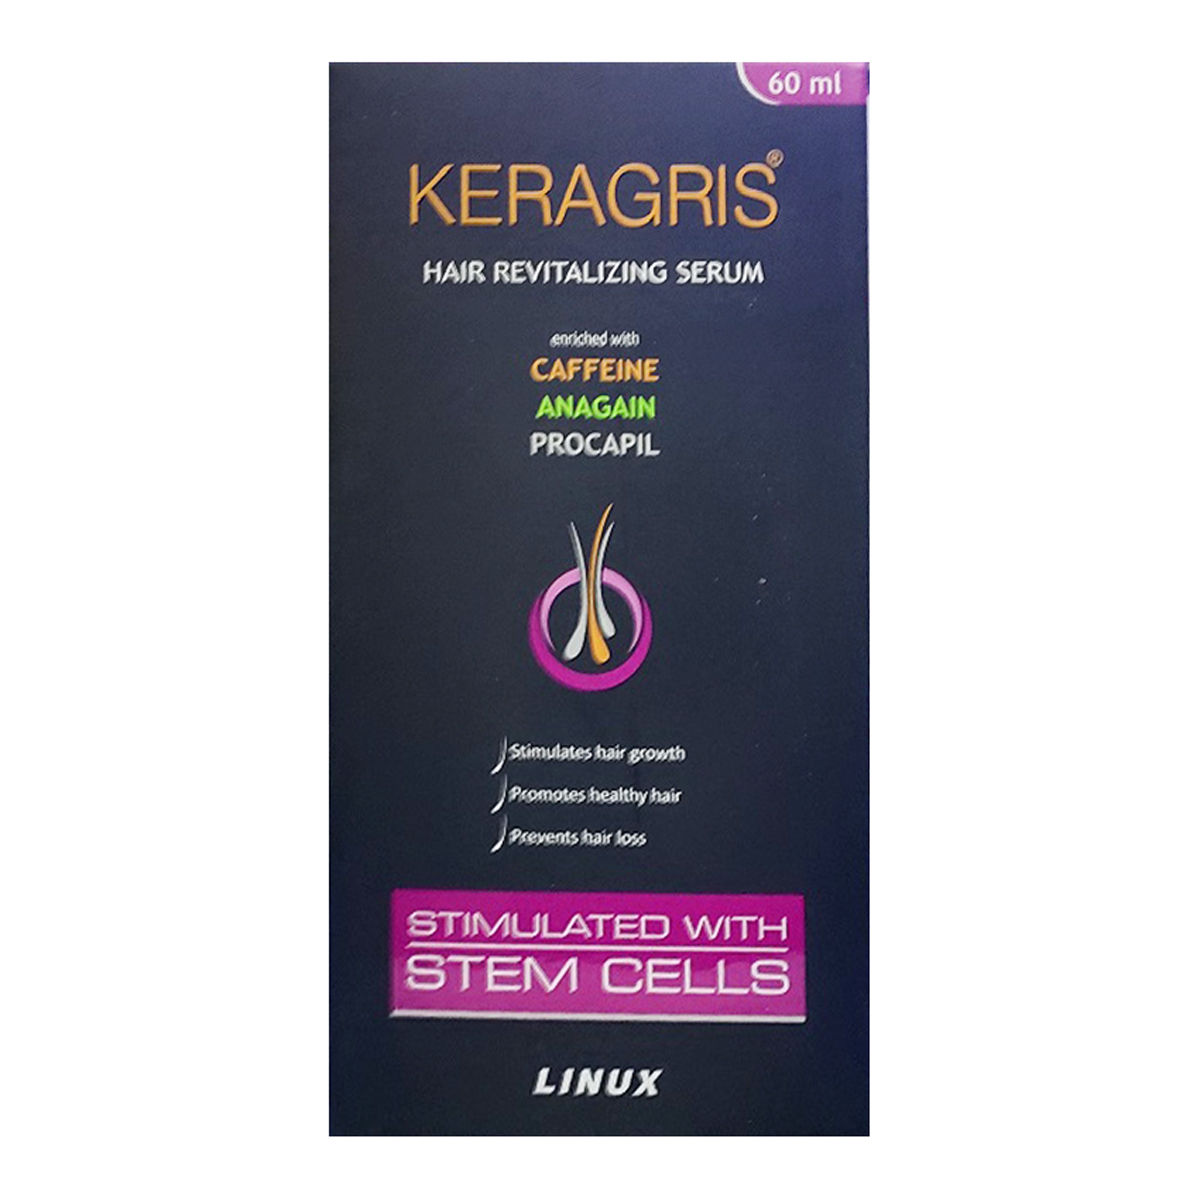 Keragris Hair Revitalizing Serum, 60 ml Price, Uses, Side Effects,  Composition - Apollo Pharmacy